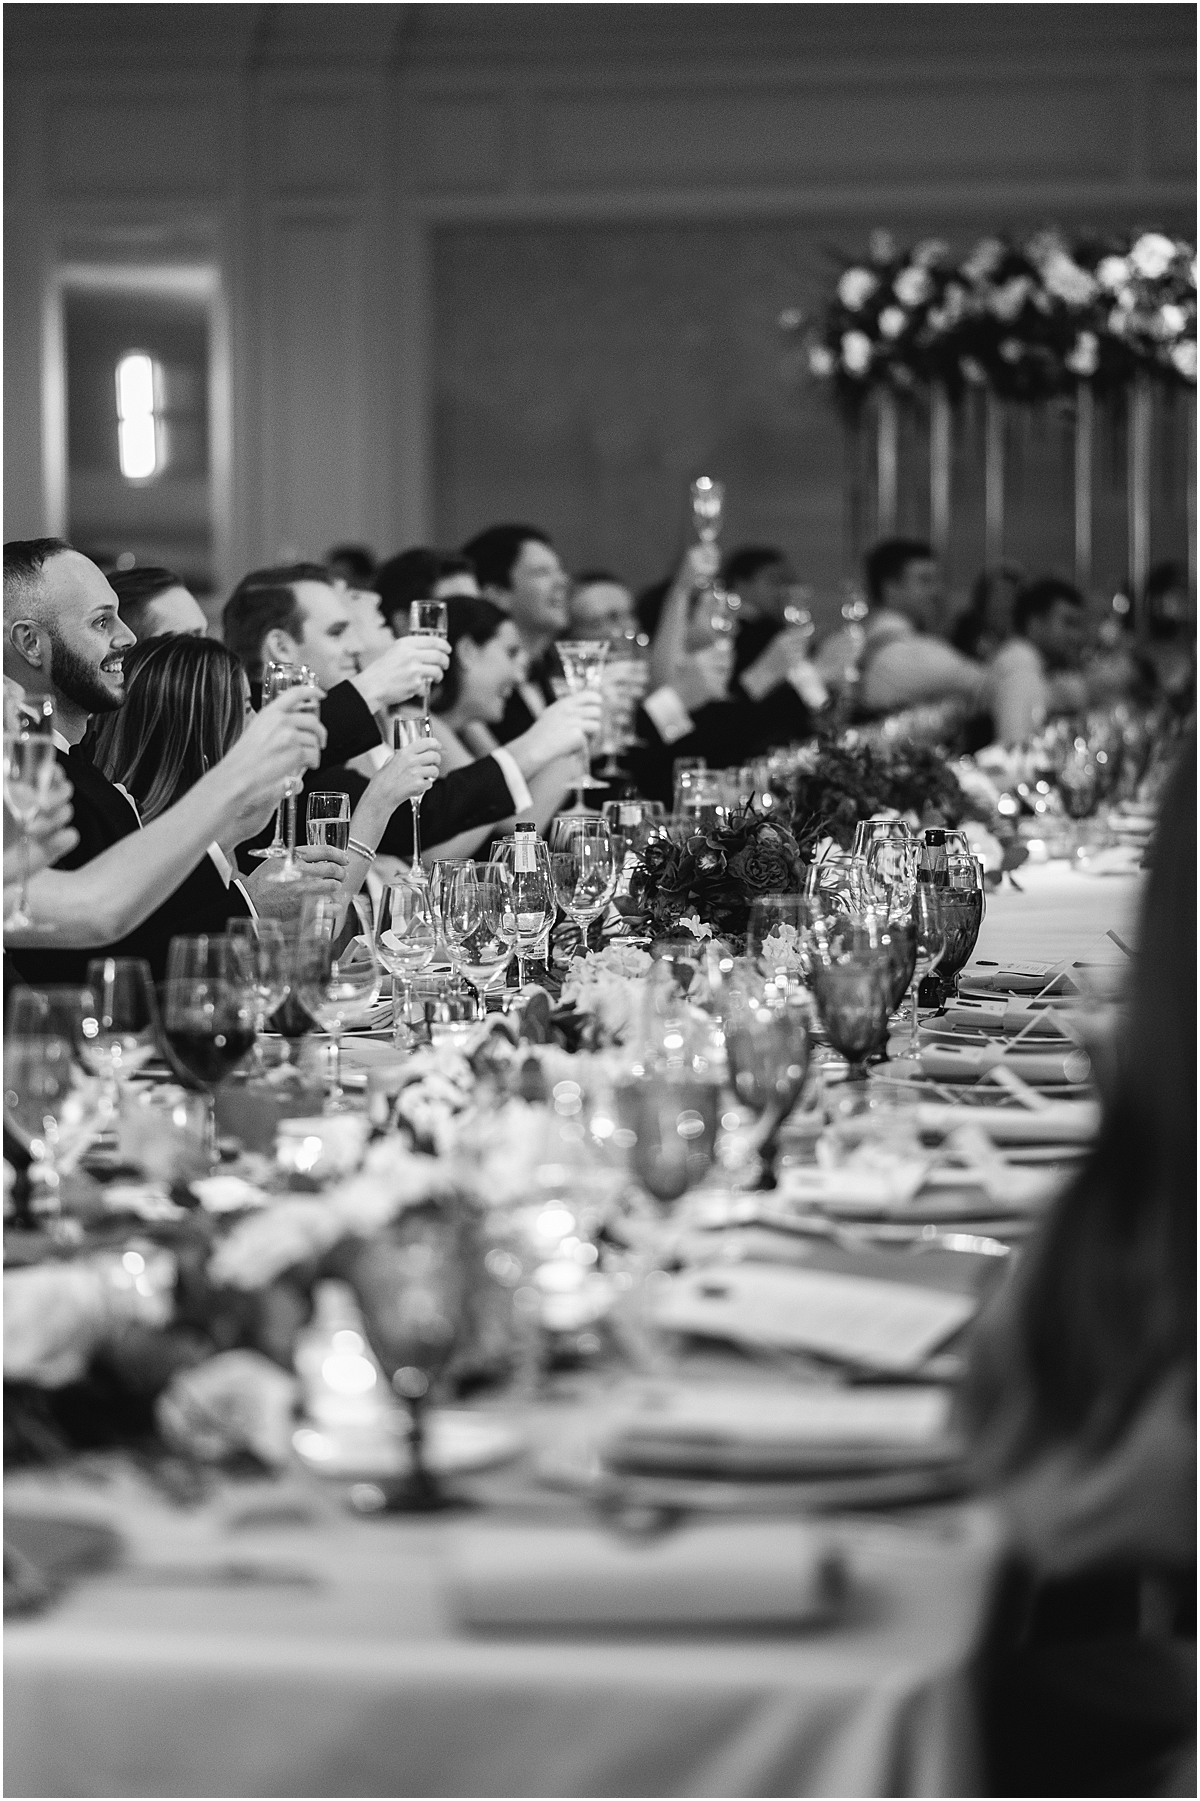 everyone raises their glasses to the newlyweds 